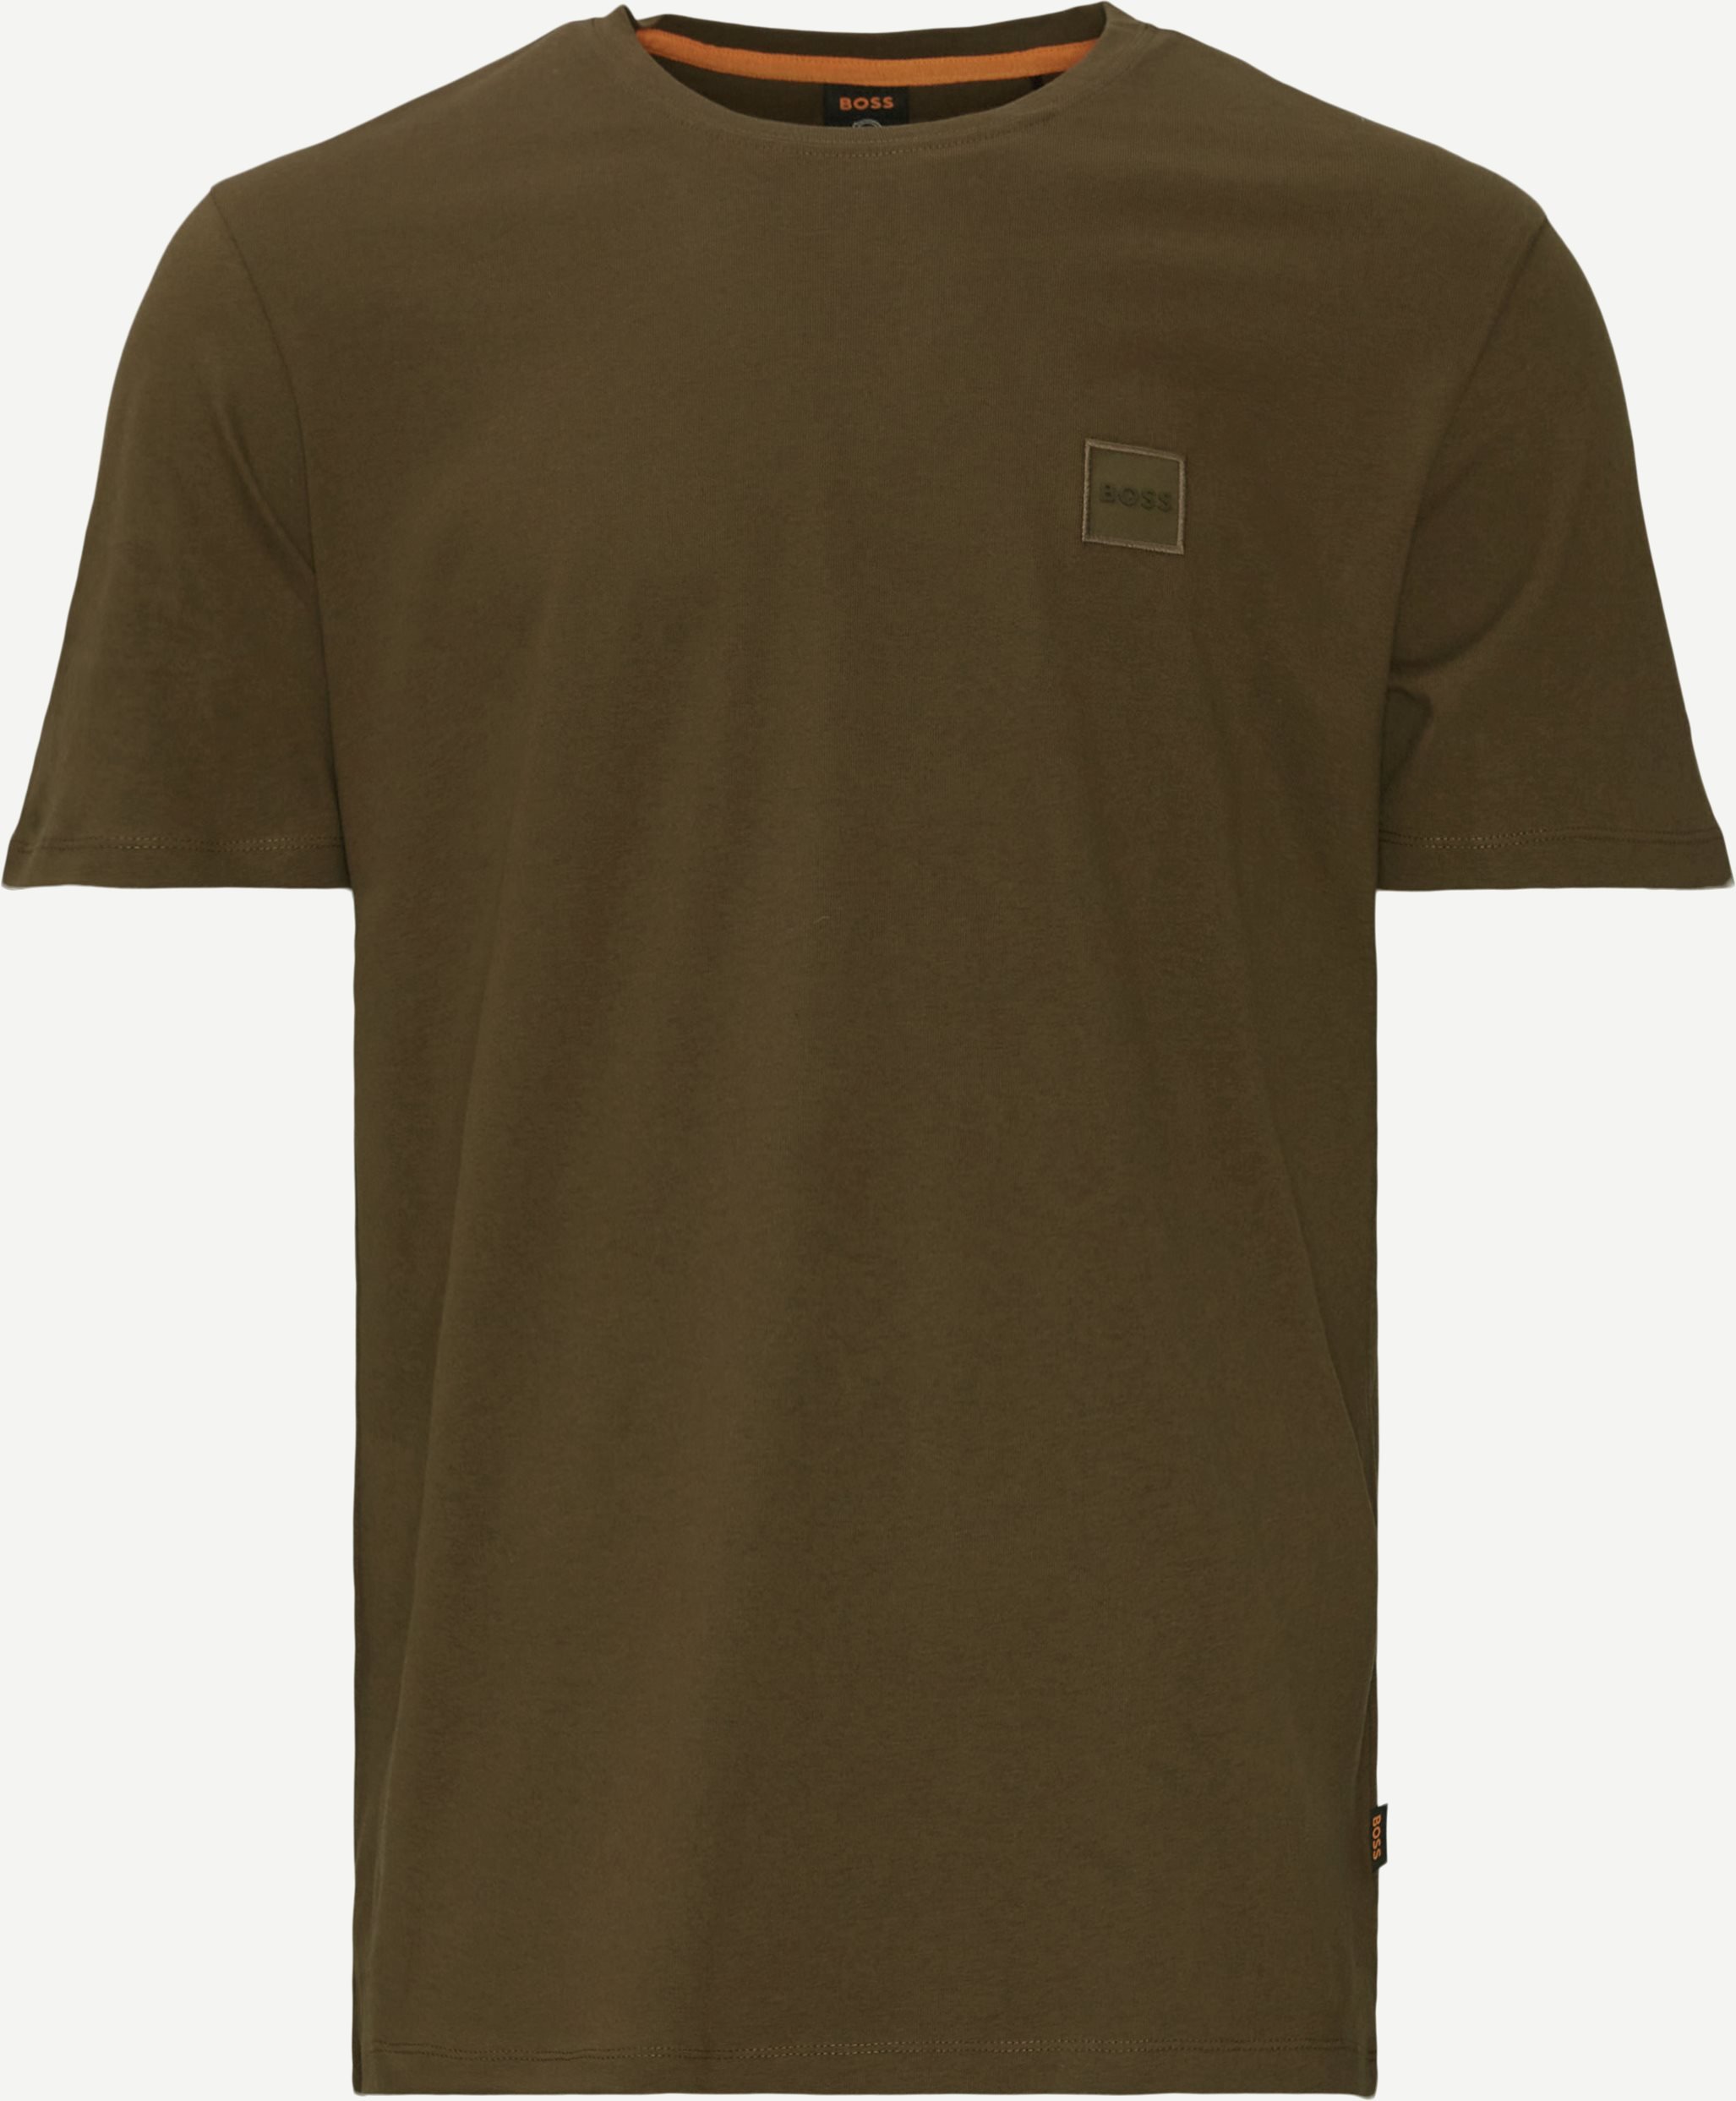 T-shirts - Relaxed fit - Army